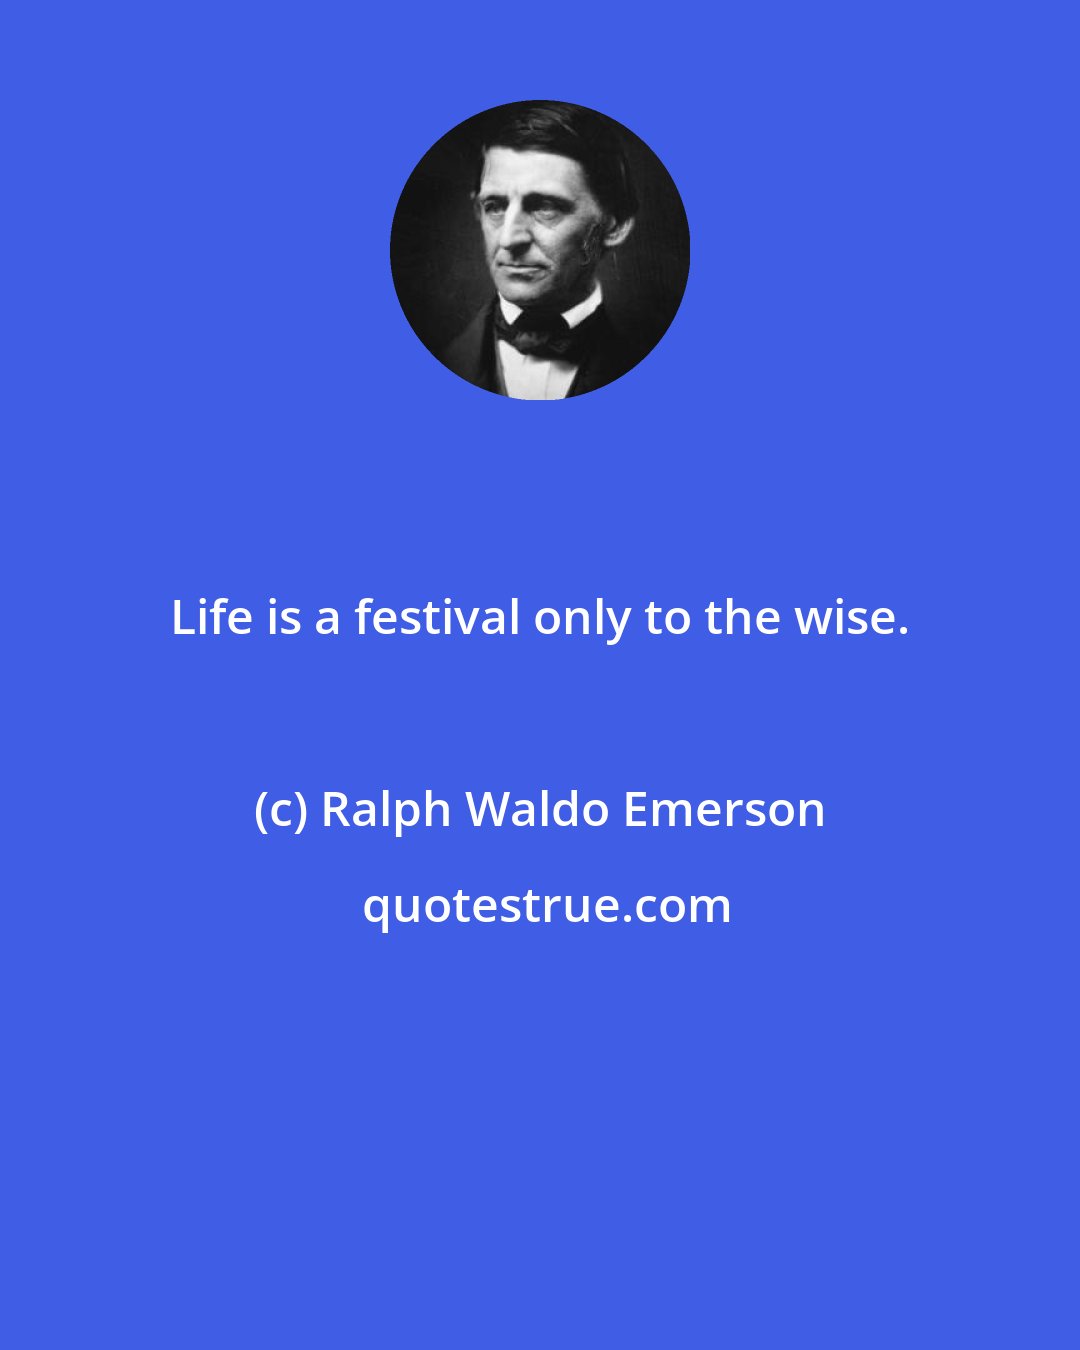 Ralph Waldo Emerson: Life is a festival only to the wise.